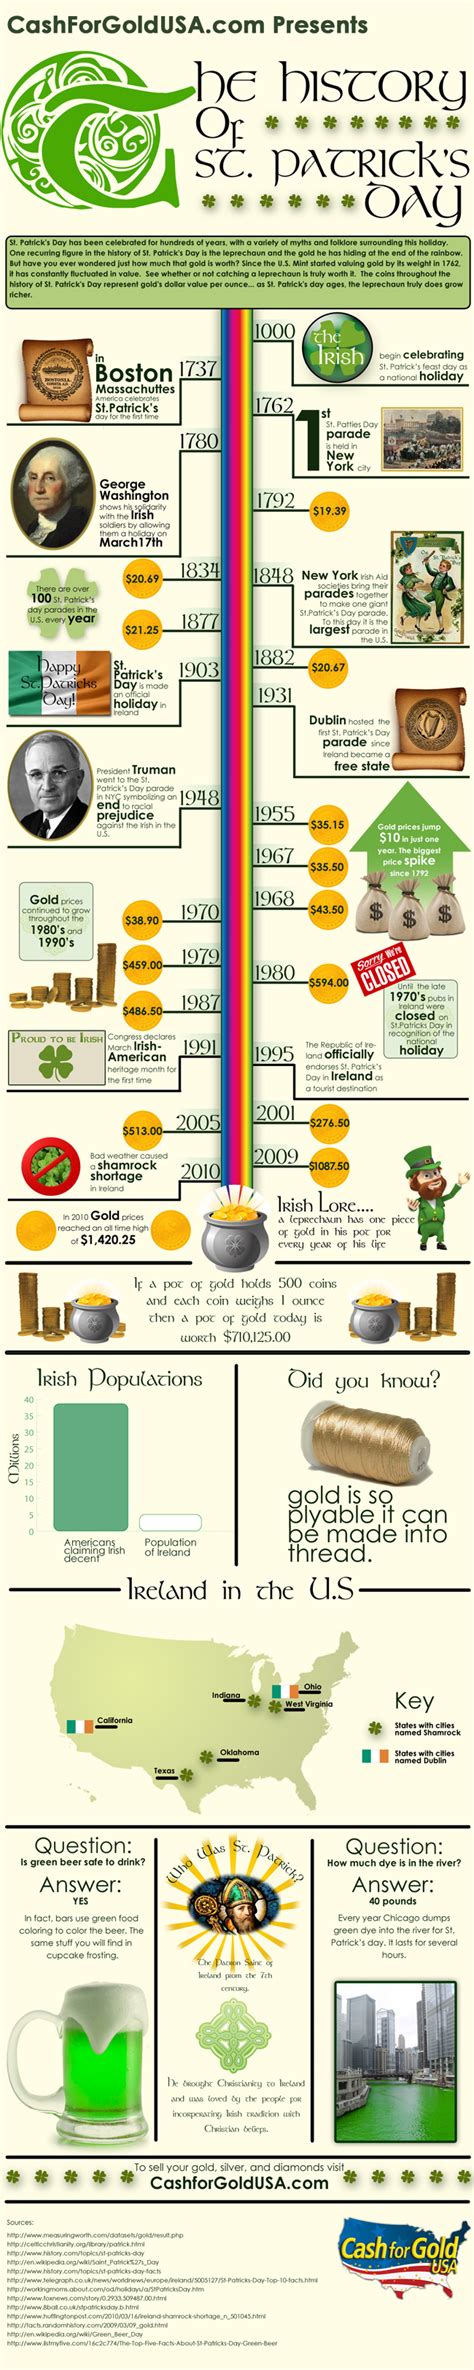 The History Of St Patricks Day Gold [infographic]